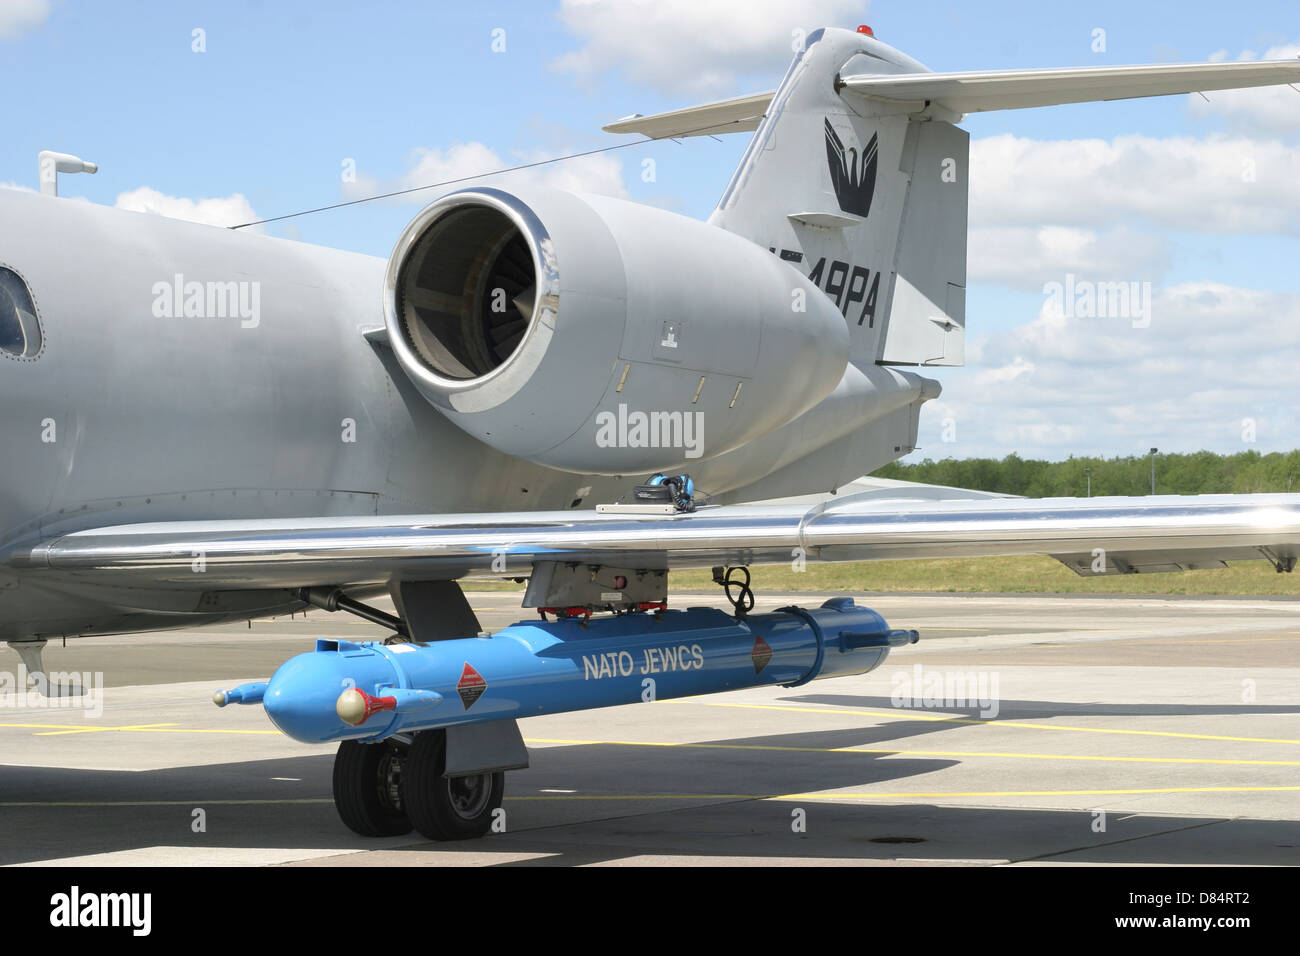 jamming-pod-on-a-learjet-offering-electronic-warfare-training-to-nato-D84RT2.jpg